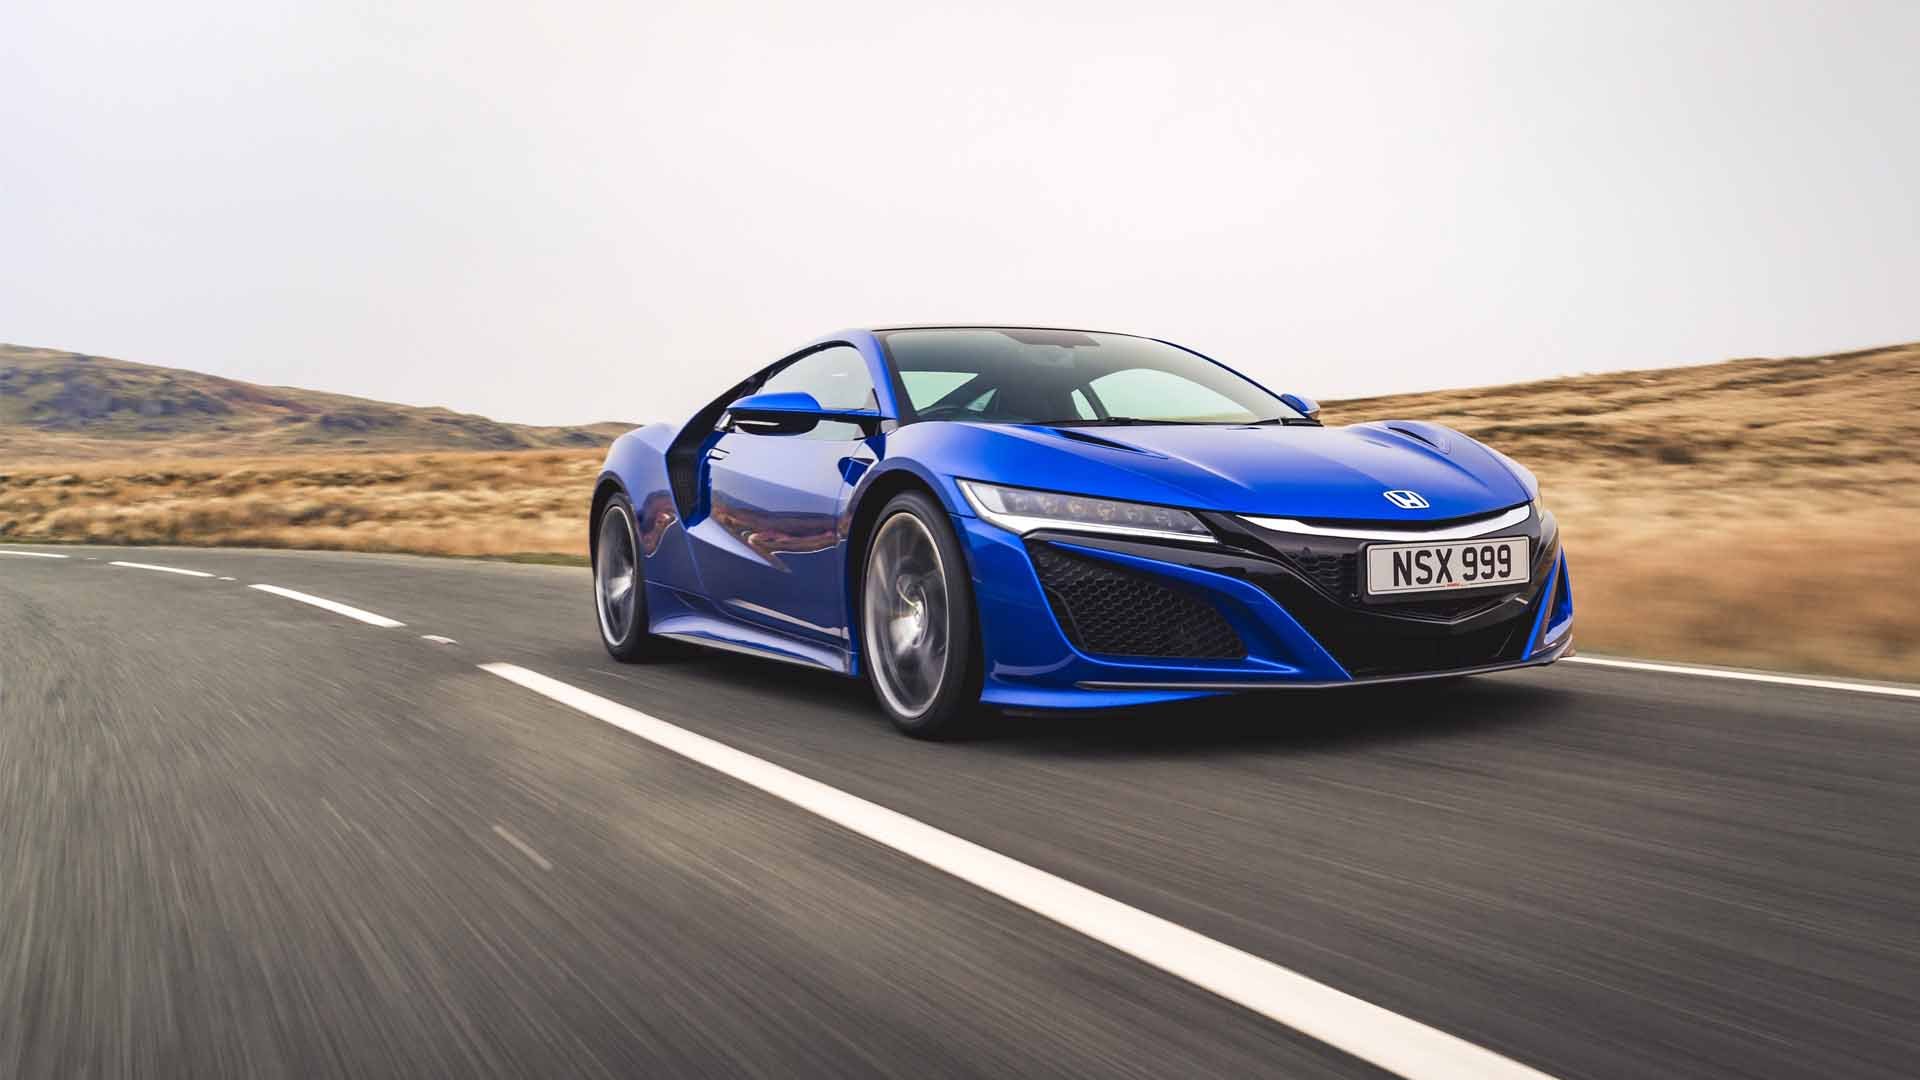 New Used Honda Nsx Cars For Sale Autotrader